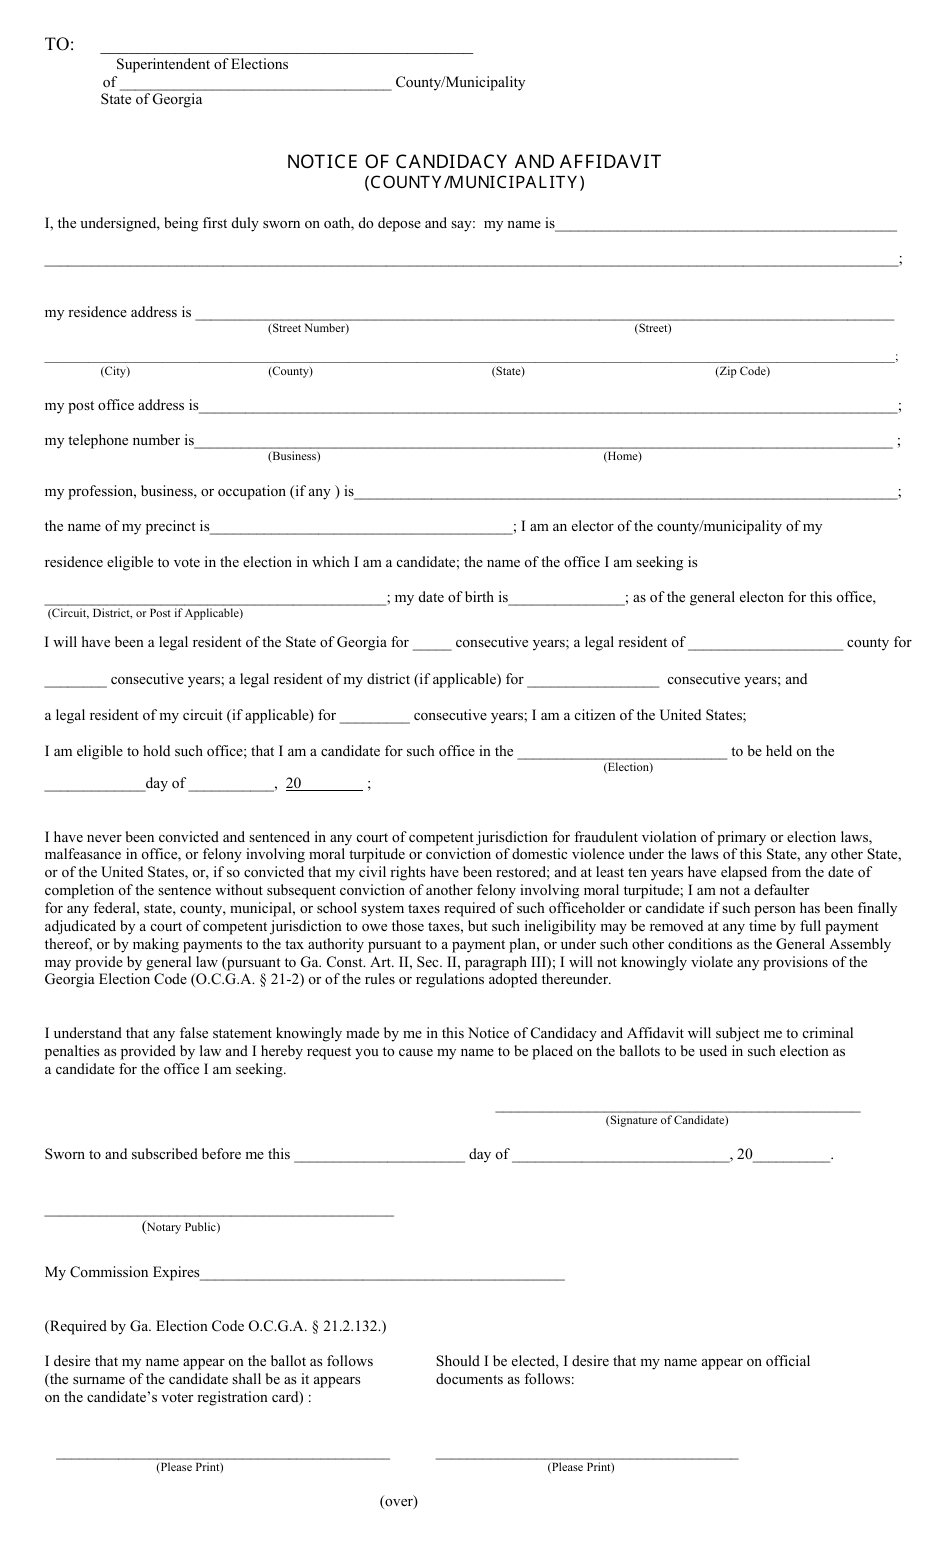 Form NC-CM-20 Notice of Candidacy and Affidavit (County/Municipality) - Nonpartisan - Georgia (United States), Page 1